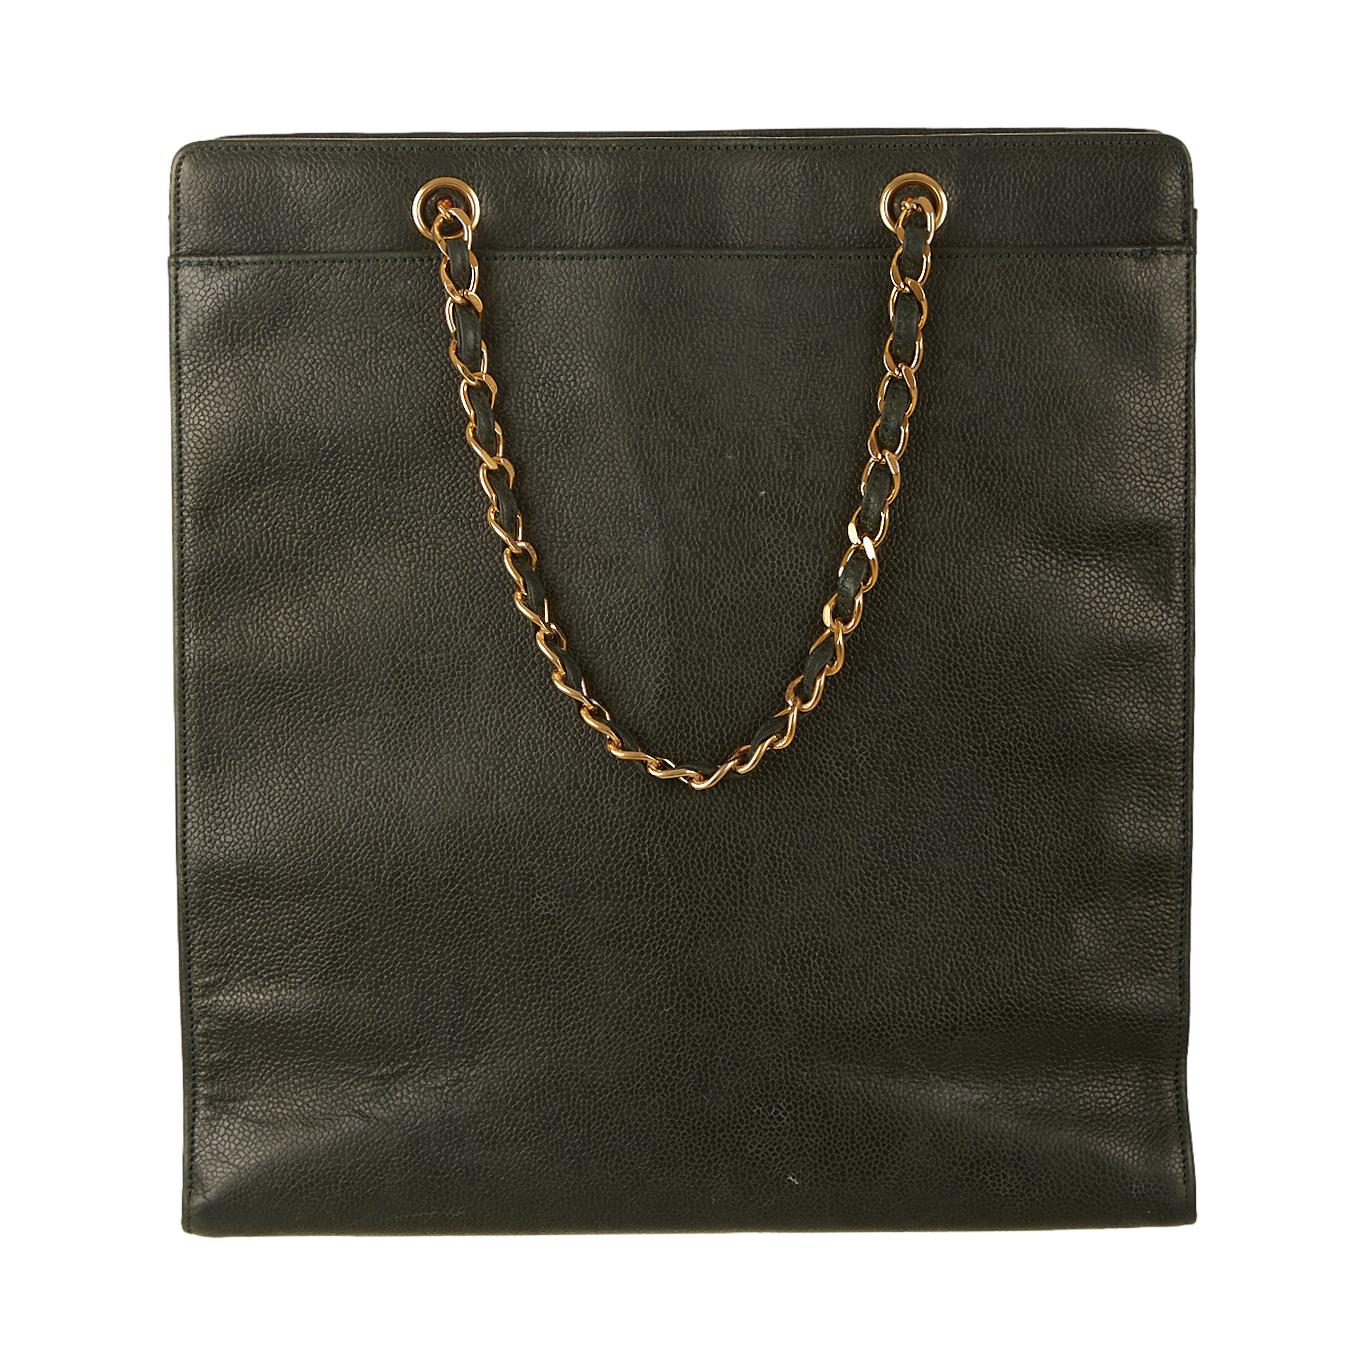 Chanel Forest Green Caviar Chain Shoulder Bag